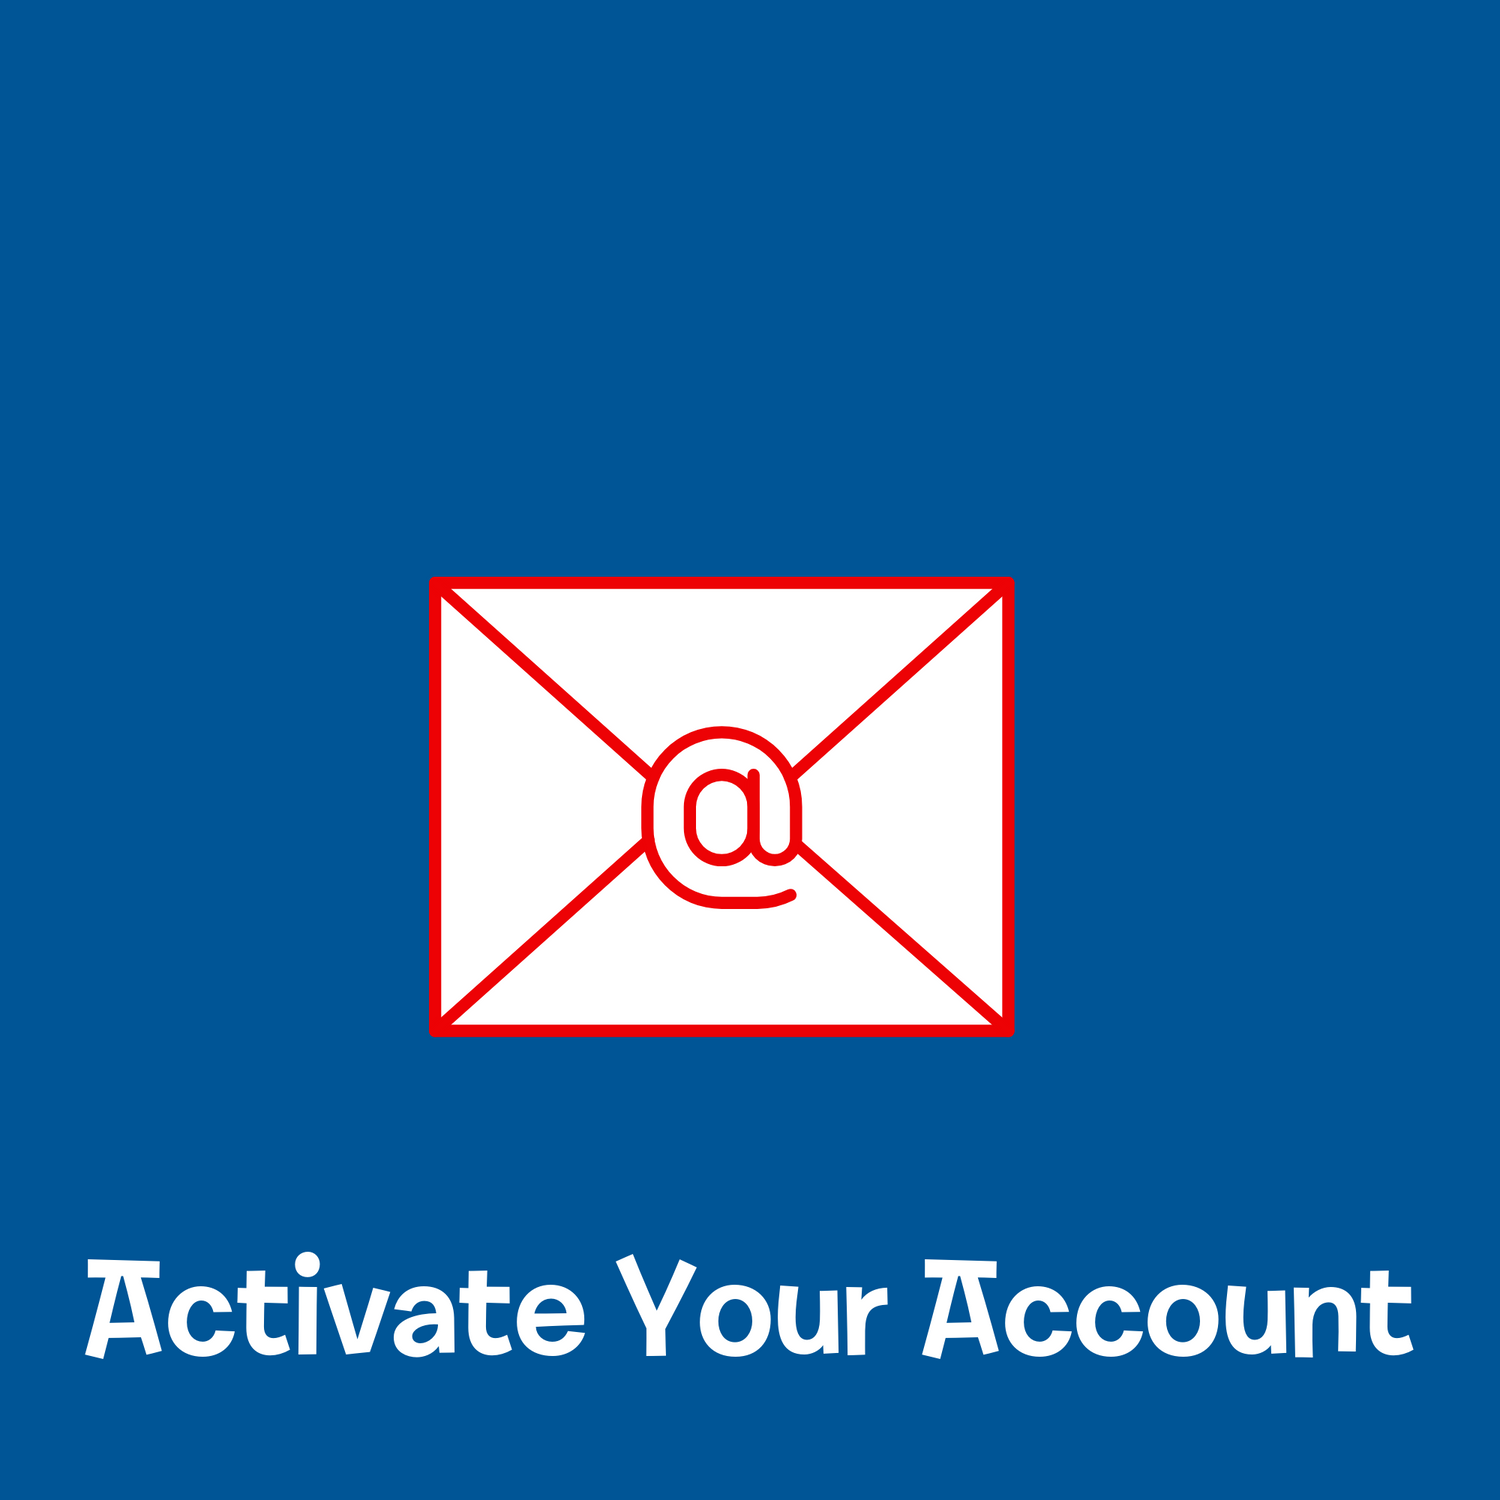 There are two ways to activate your account.